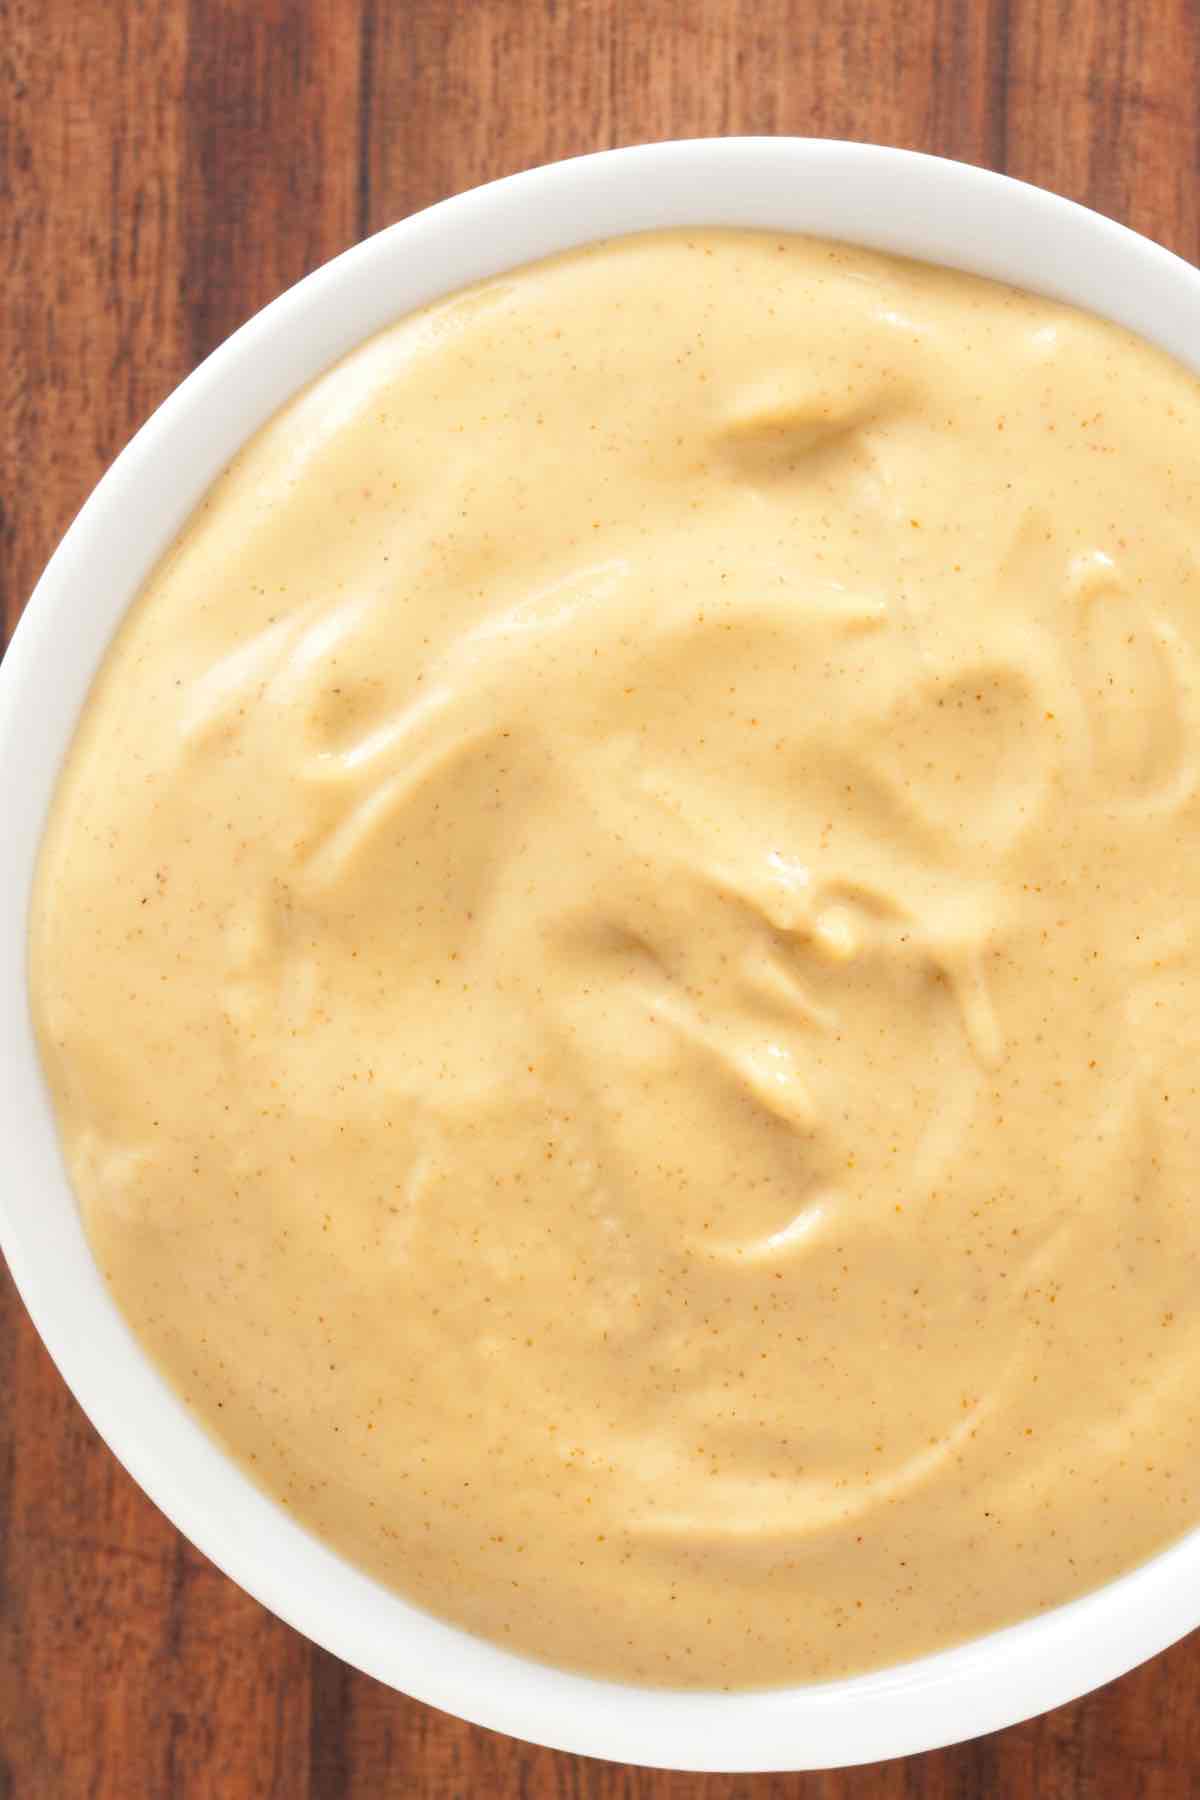 Dijon Mustard can be used to elevate any sandwich, prepare a marinade for juicy honey mustard chicken, or as a tangy salad dressing. But what if you’re all out? Save yourself a trip to the store with these simple Dijon Mustard Substitutes.